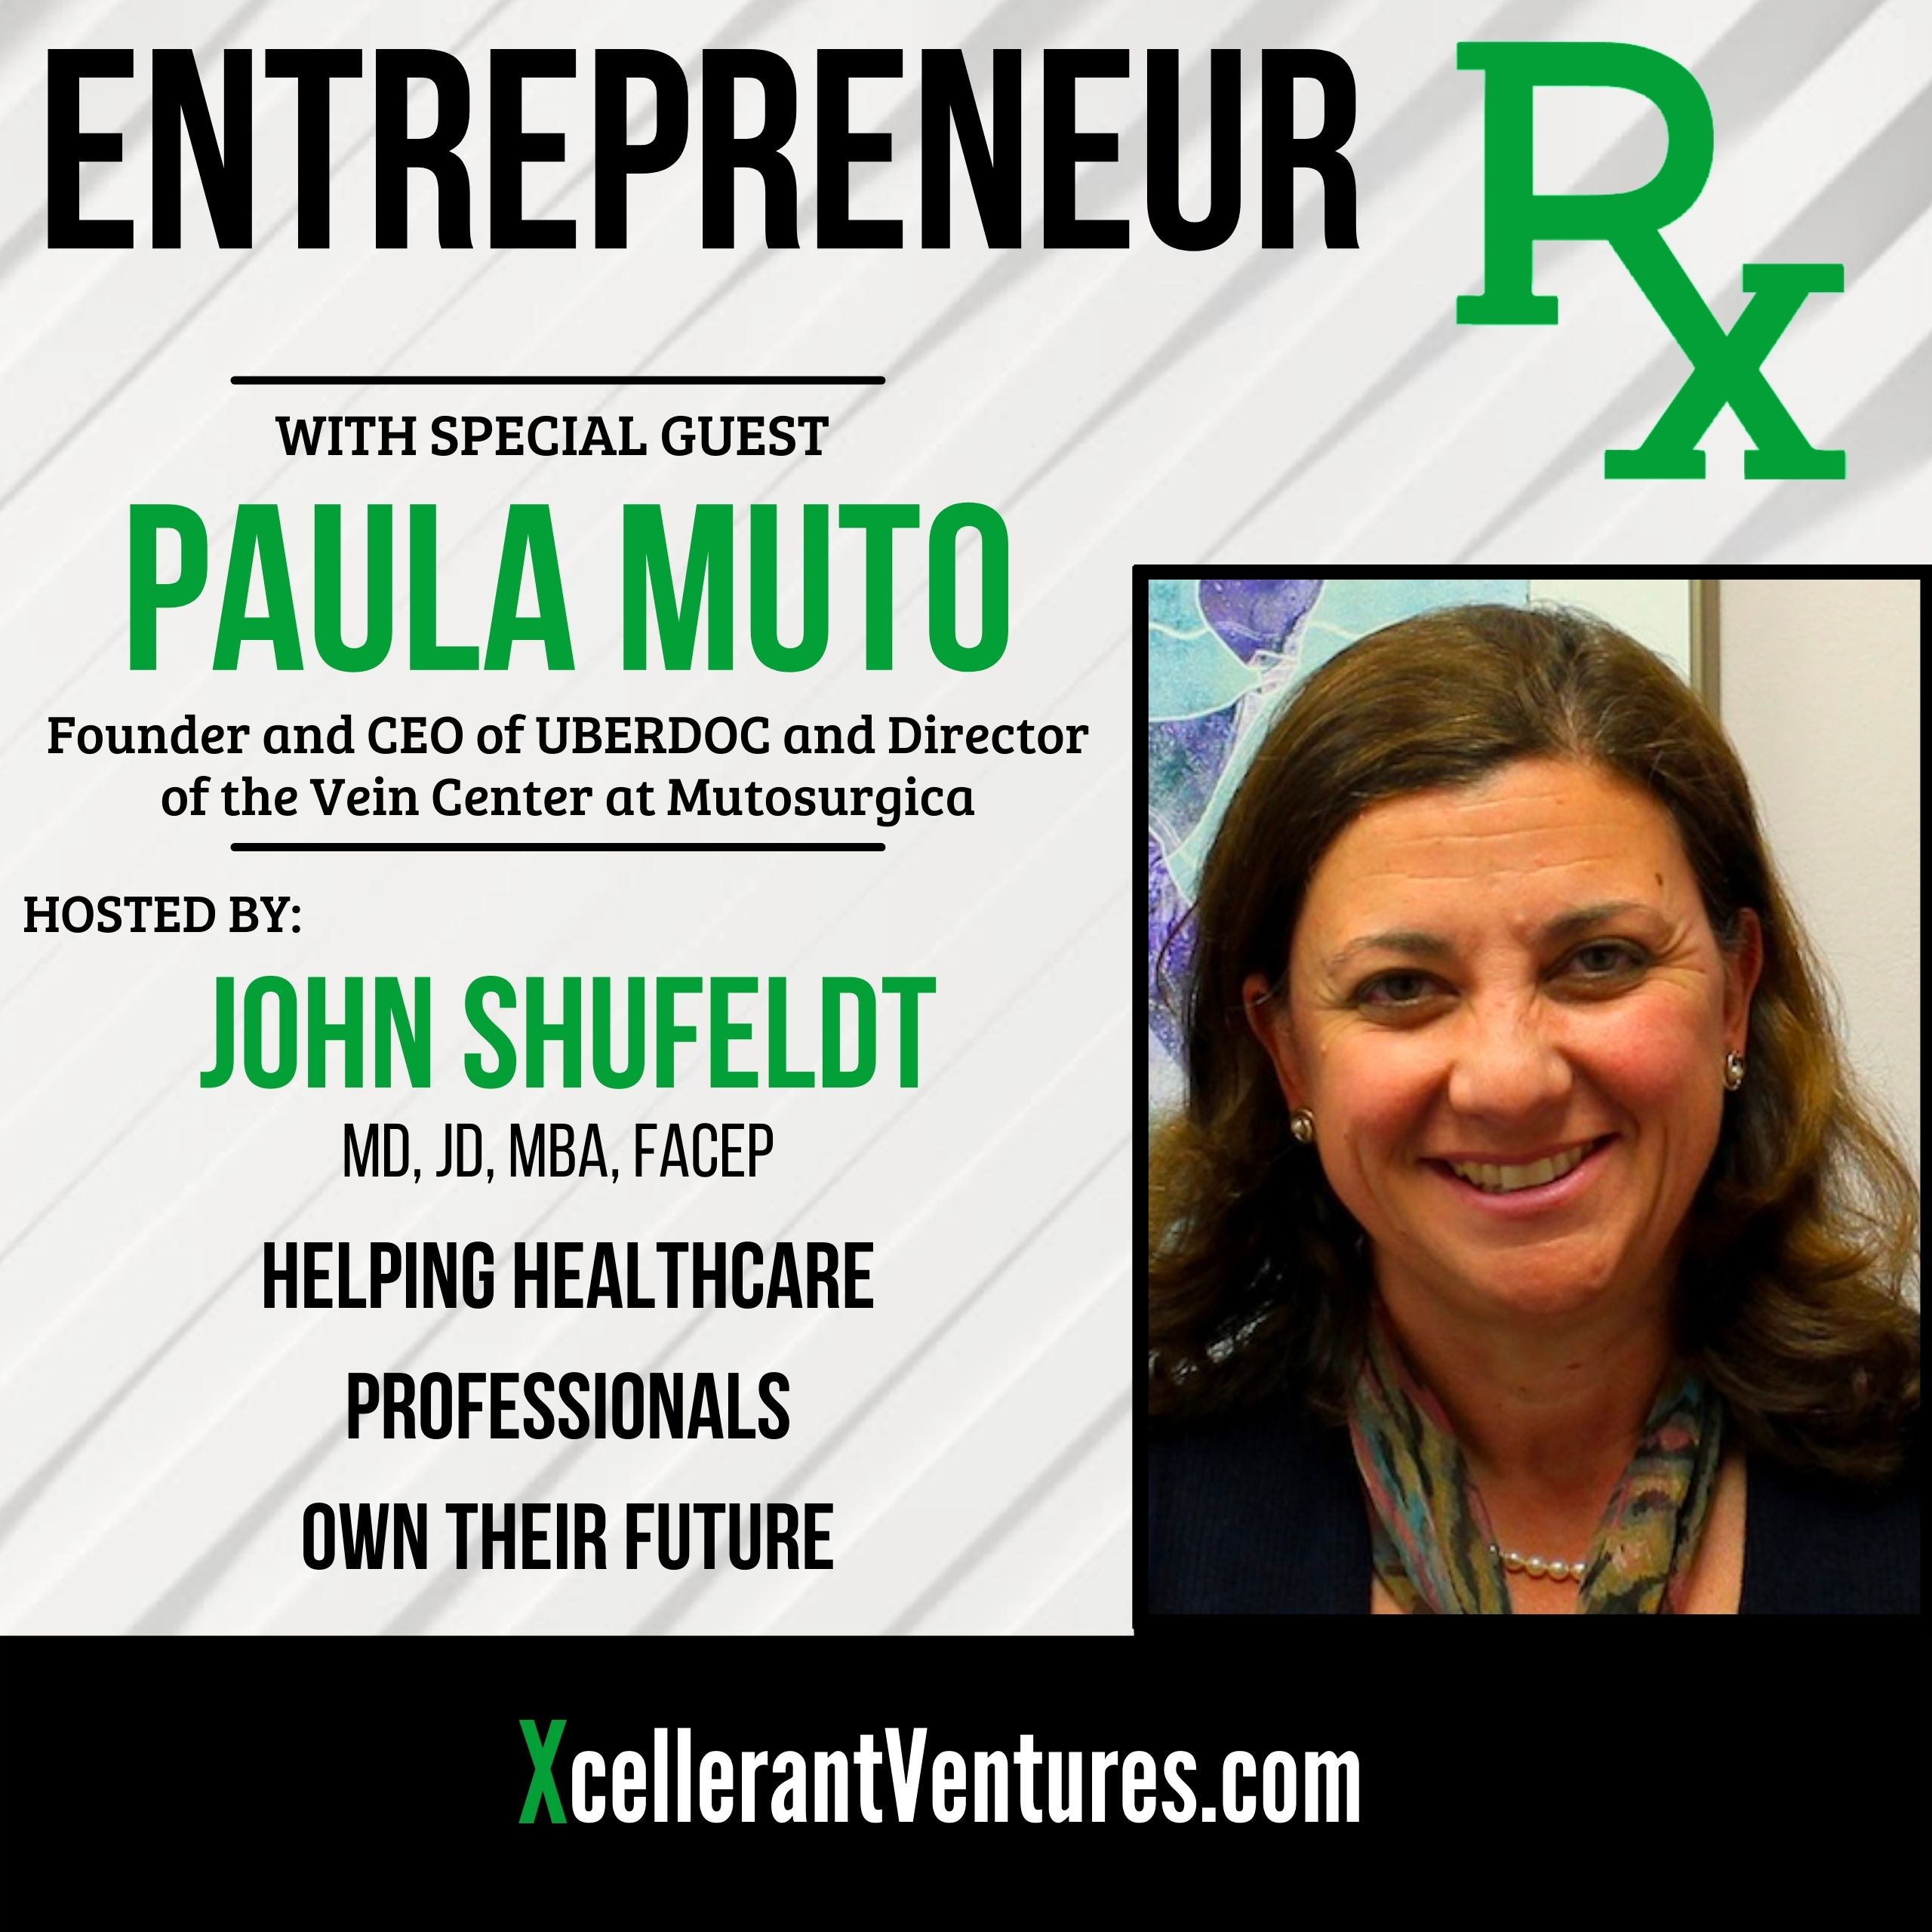 RX34: Entrepreneur Rx Interview with Paula Muto, MD, Founder and CEO of UBERDOC and Director of the Vein Center at Mutosurgica